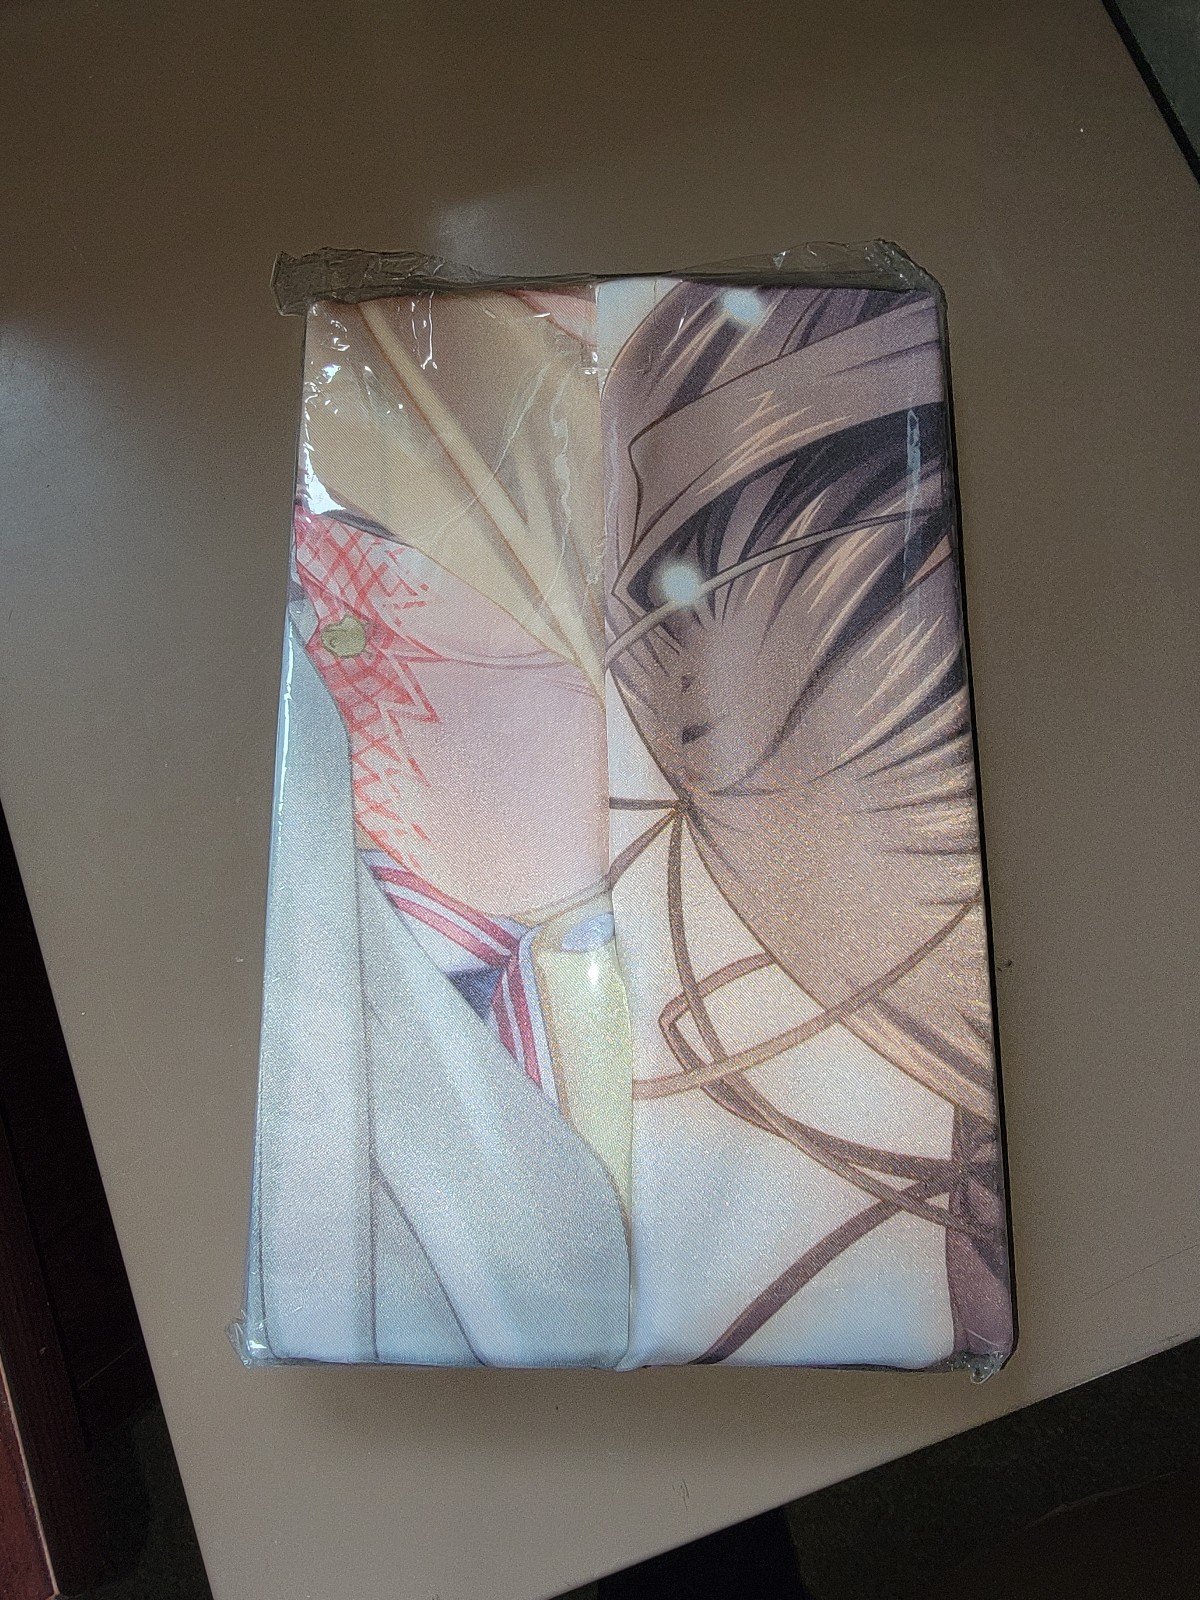 Clannad rare body pillow case FbE5auD28